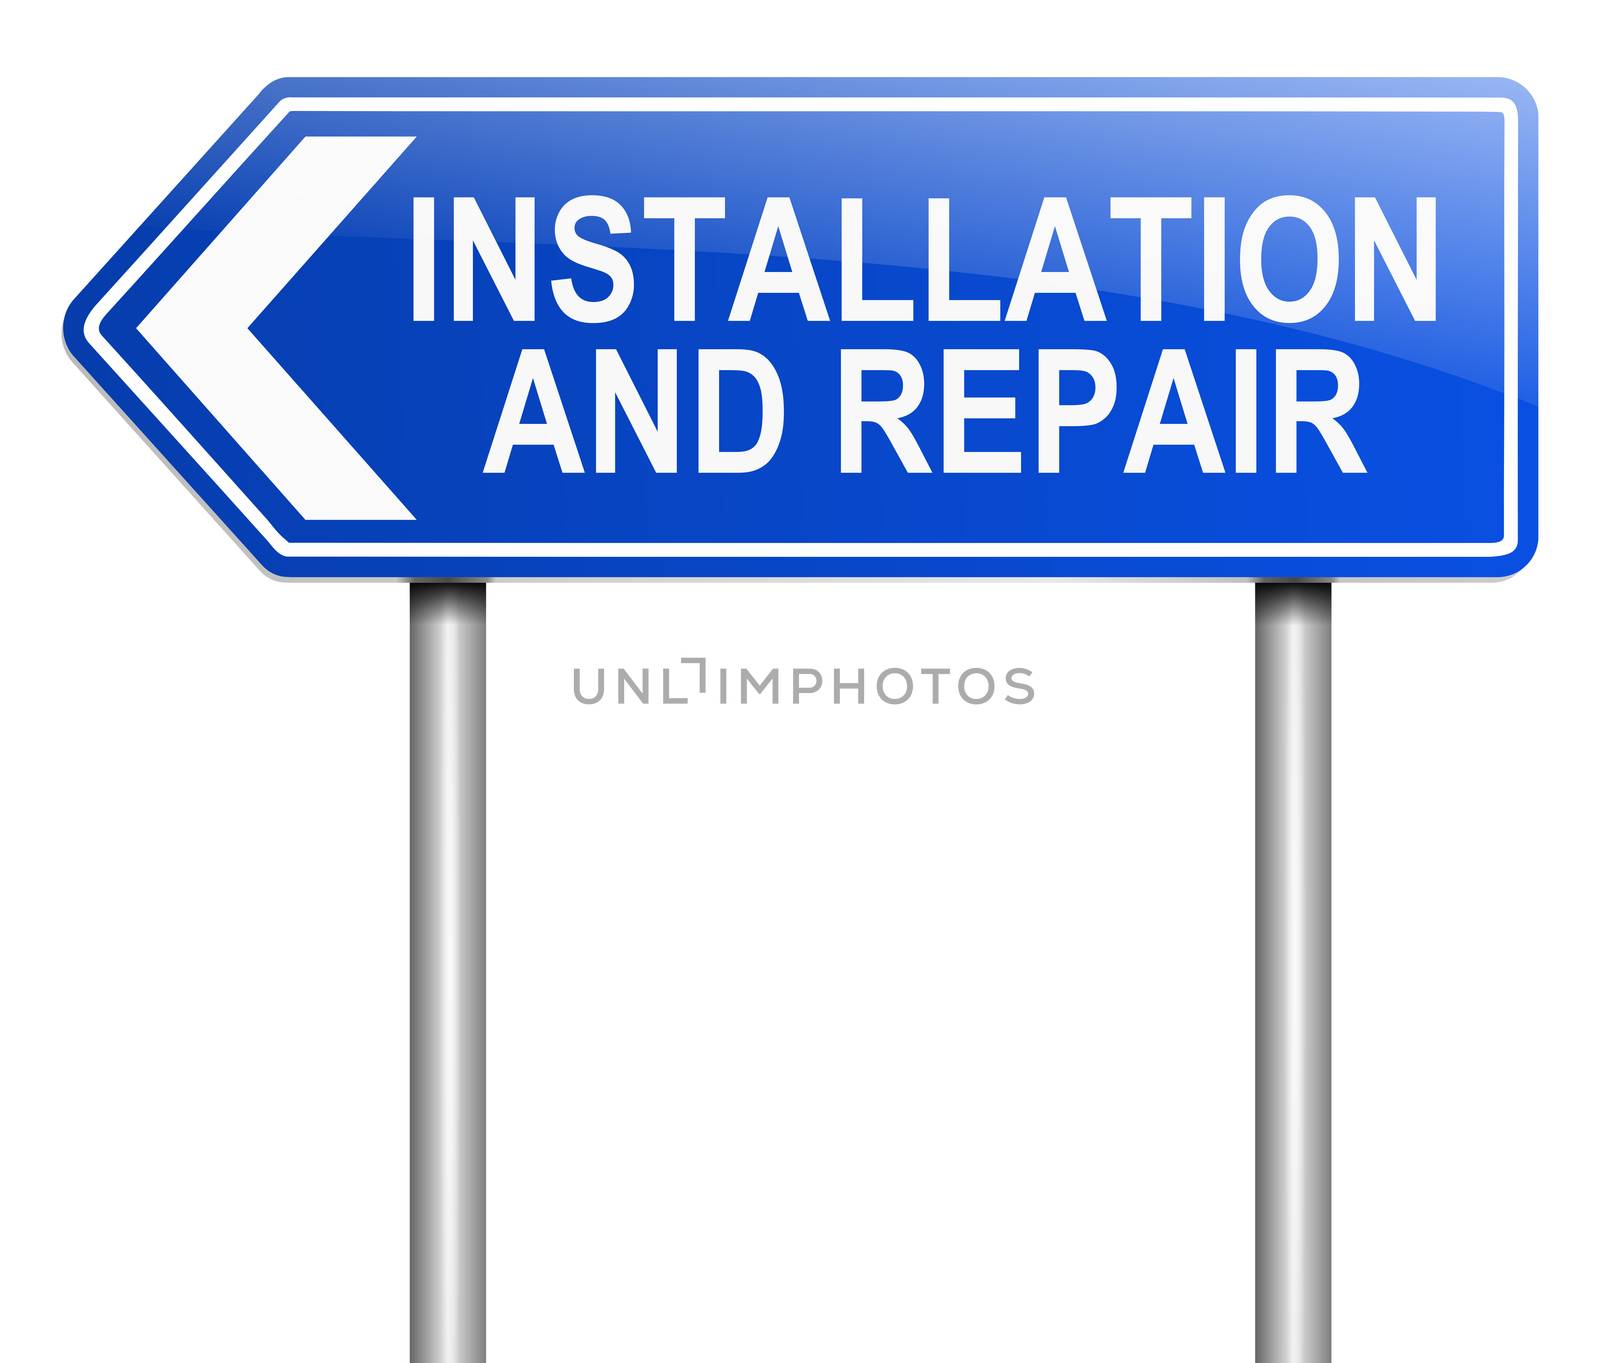 Illustration depicting a sign with an installation and repair concept.